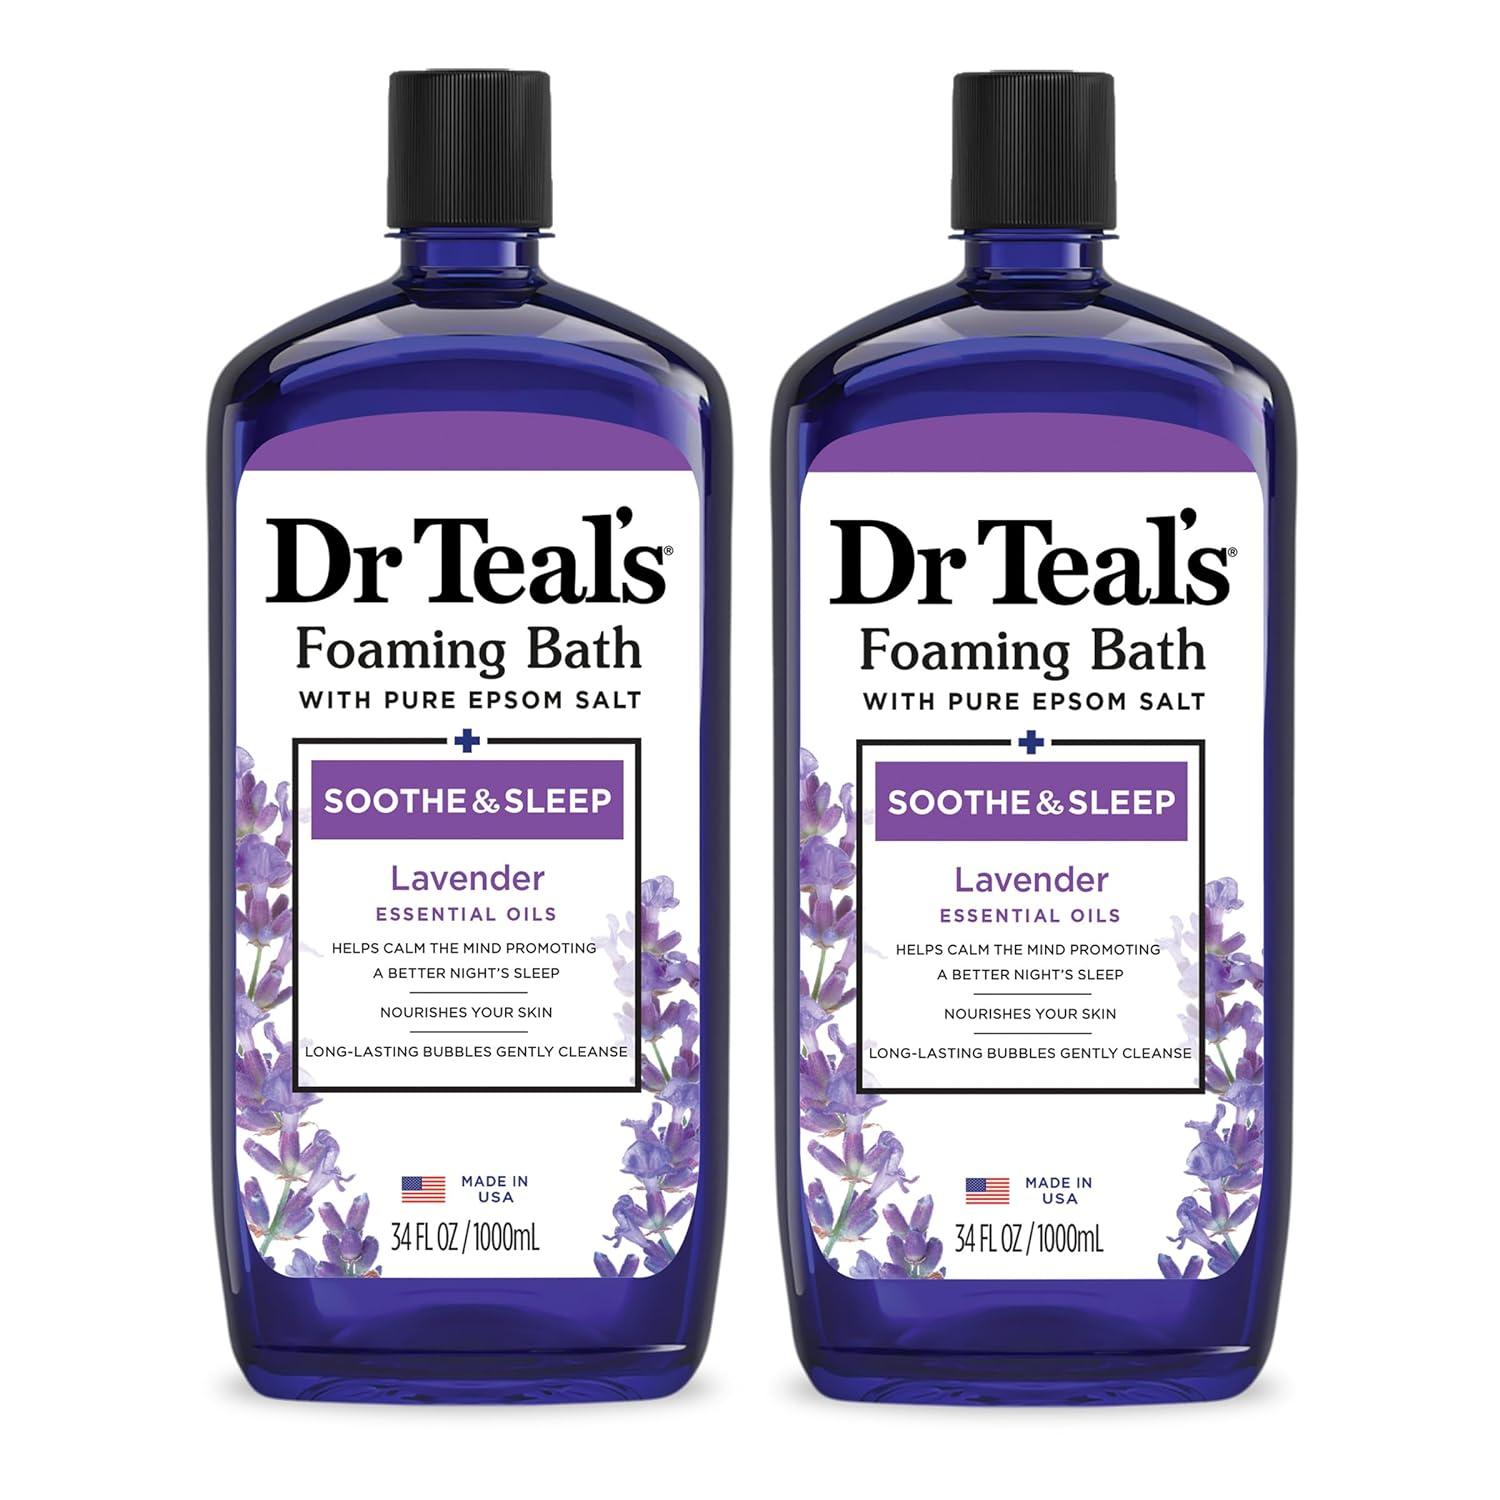 Dr Teals Foaming Bath with Pure Epsom Salt 2 Pack for $8.83 Shipped